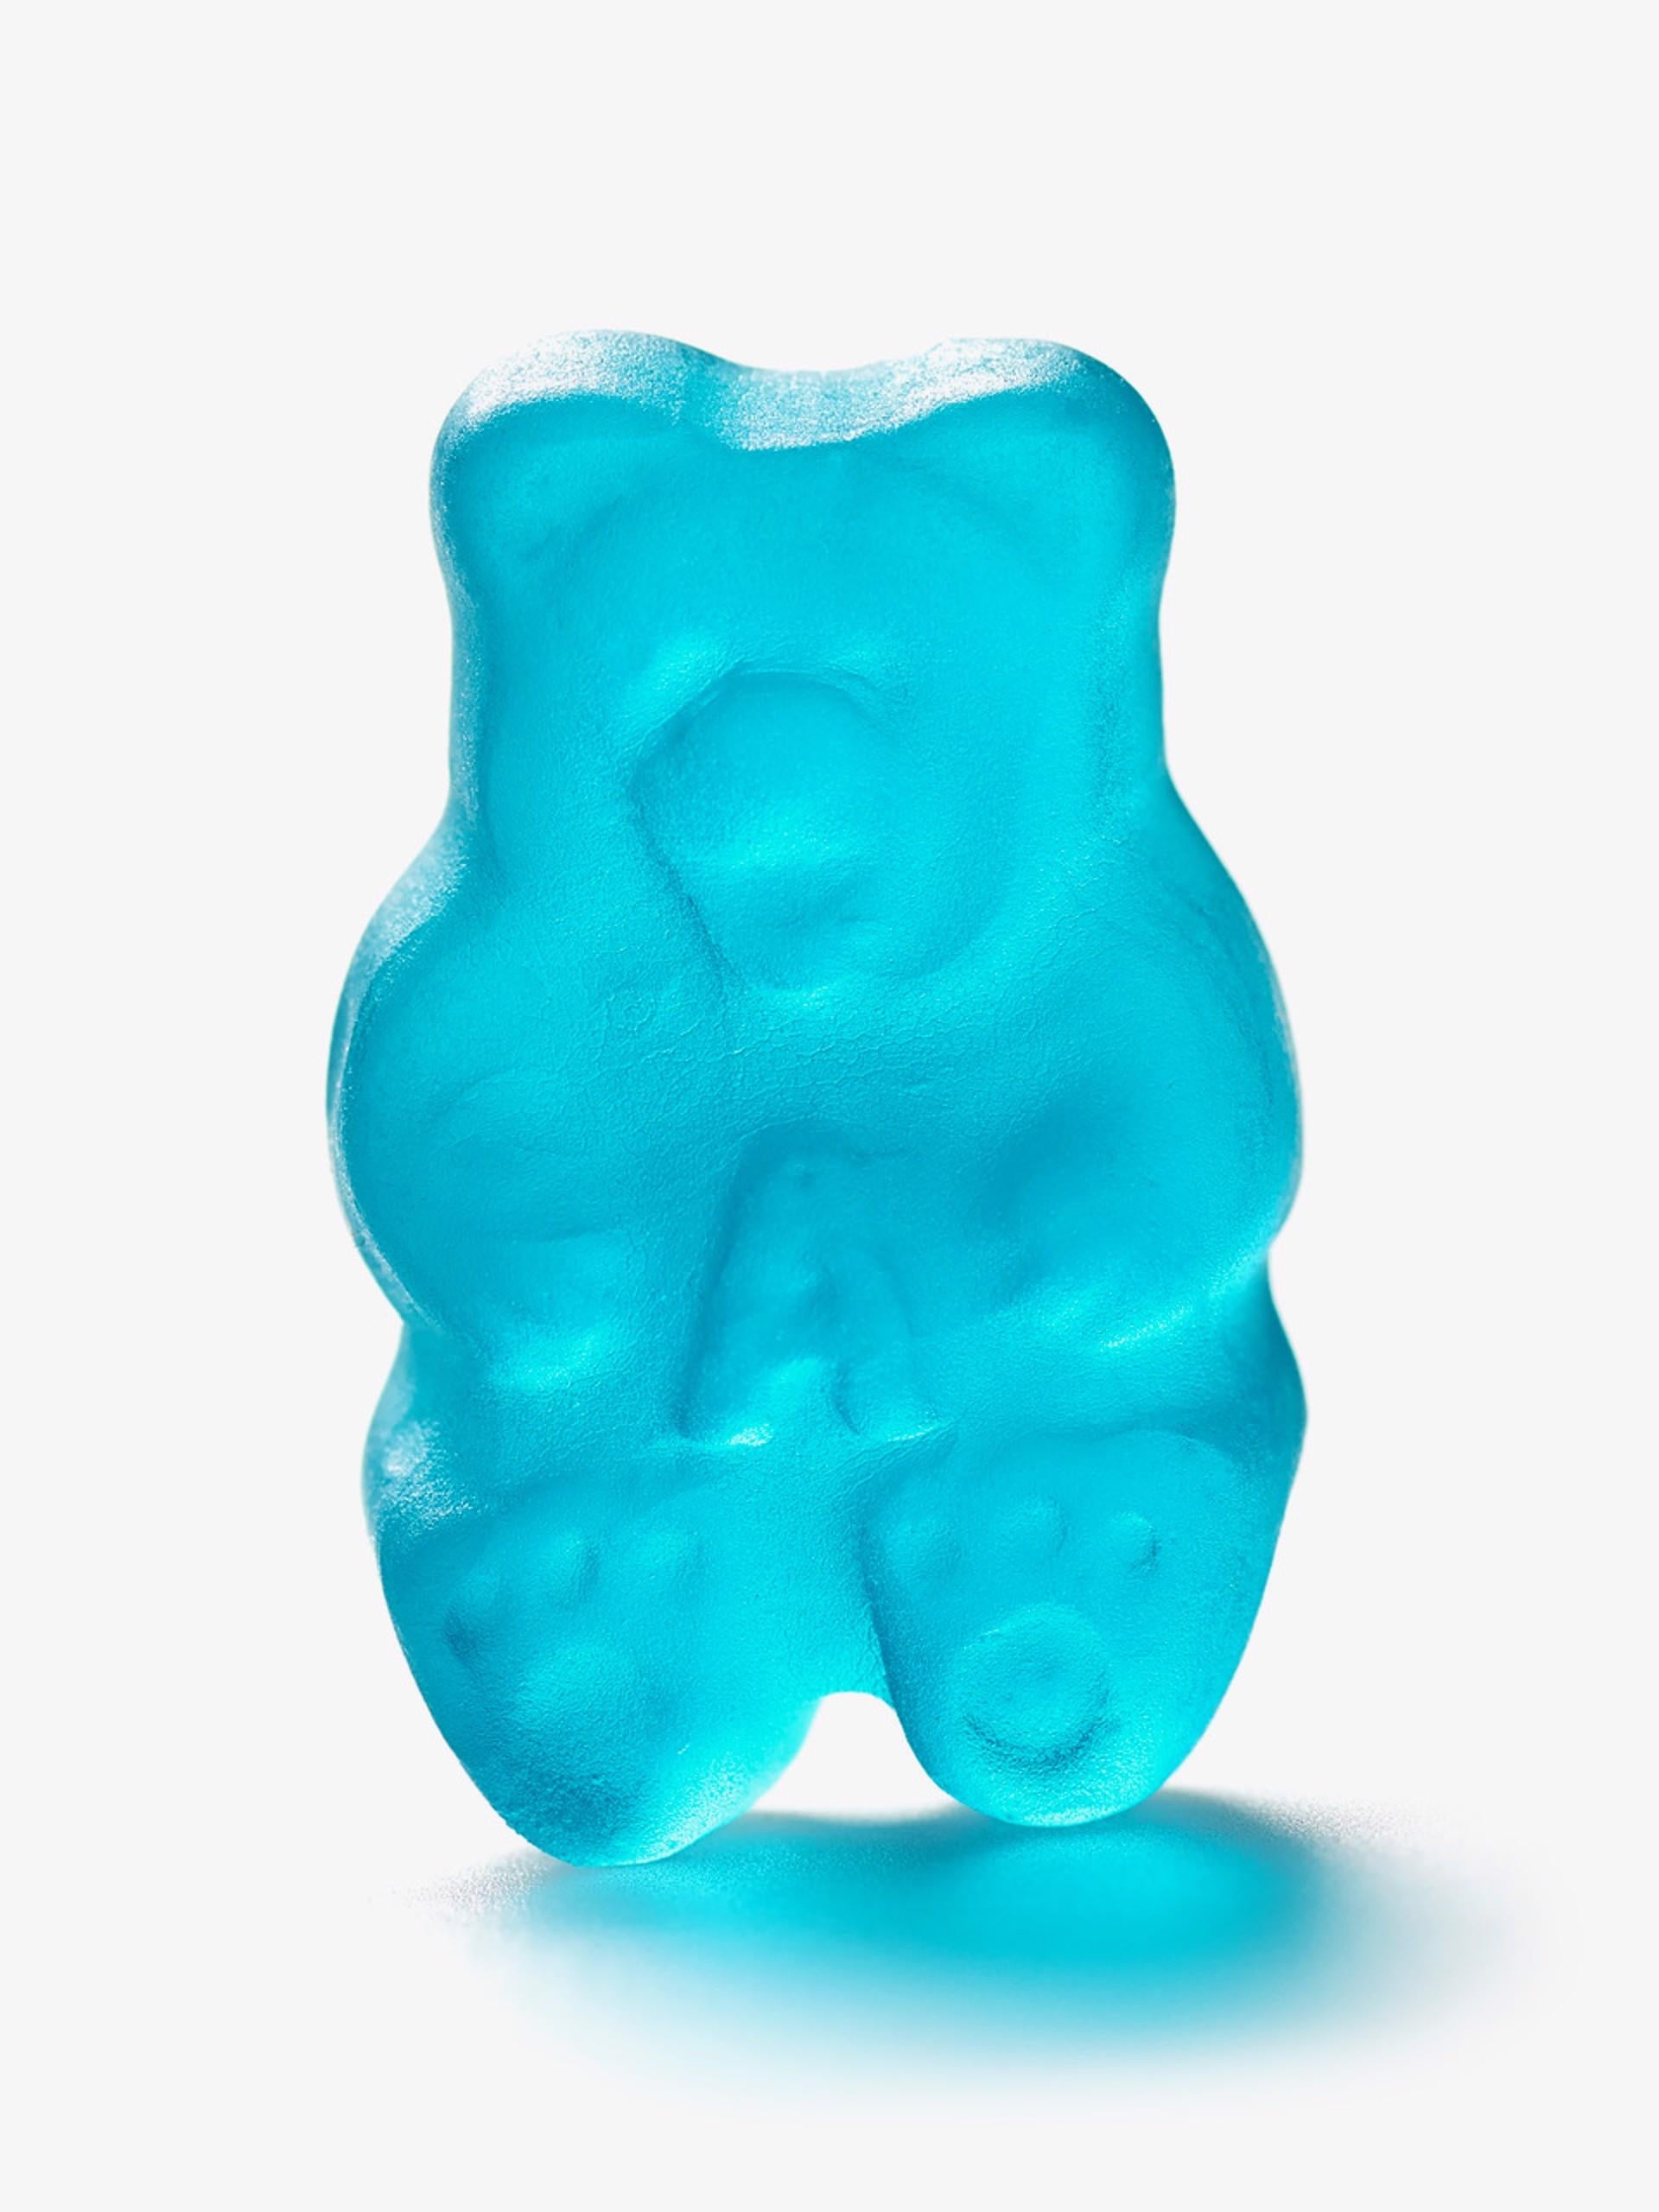 Peter Andrew Lusztyk - Gummy Bear Blue, Photography 2021, Printed After